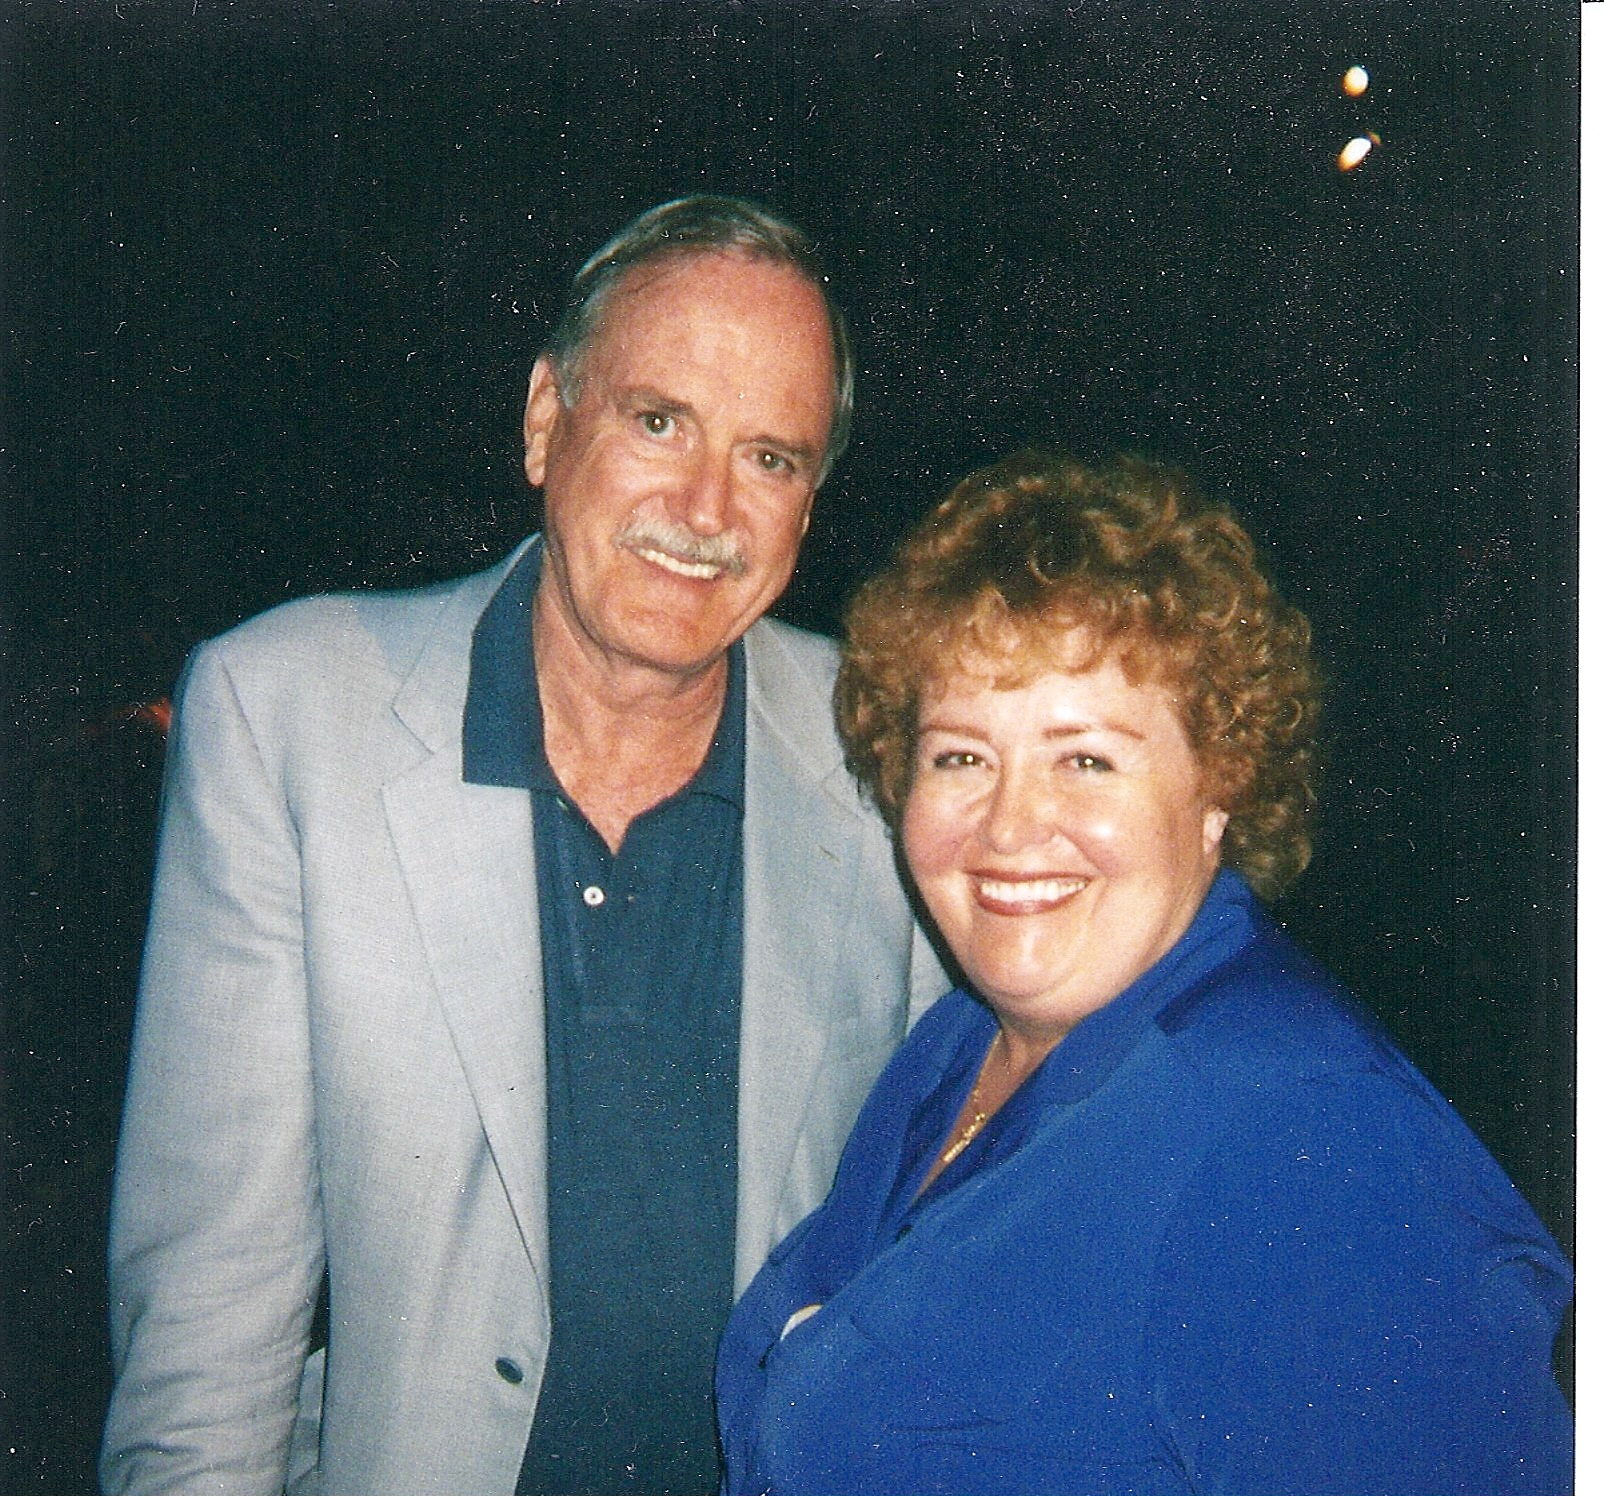 John Cleese & Tracy Weisert. We worked together on Columbia's SILVERADO in Santa Fe in 1984. This was taken in Beverly Hills at the WGA in 2008.